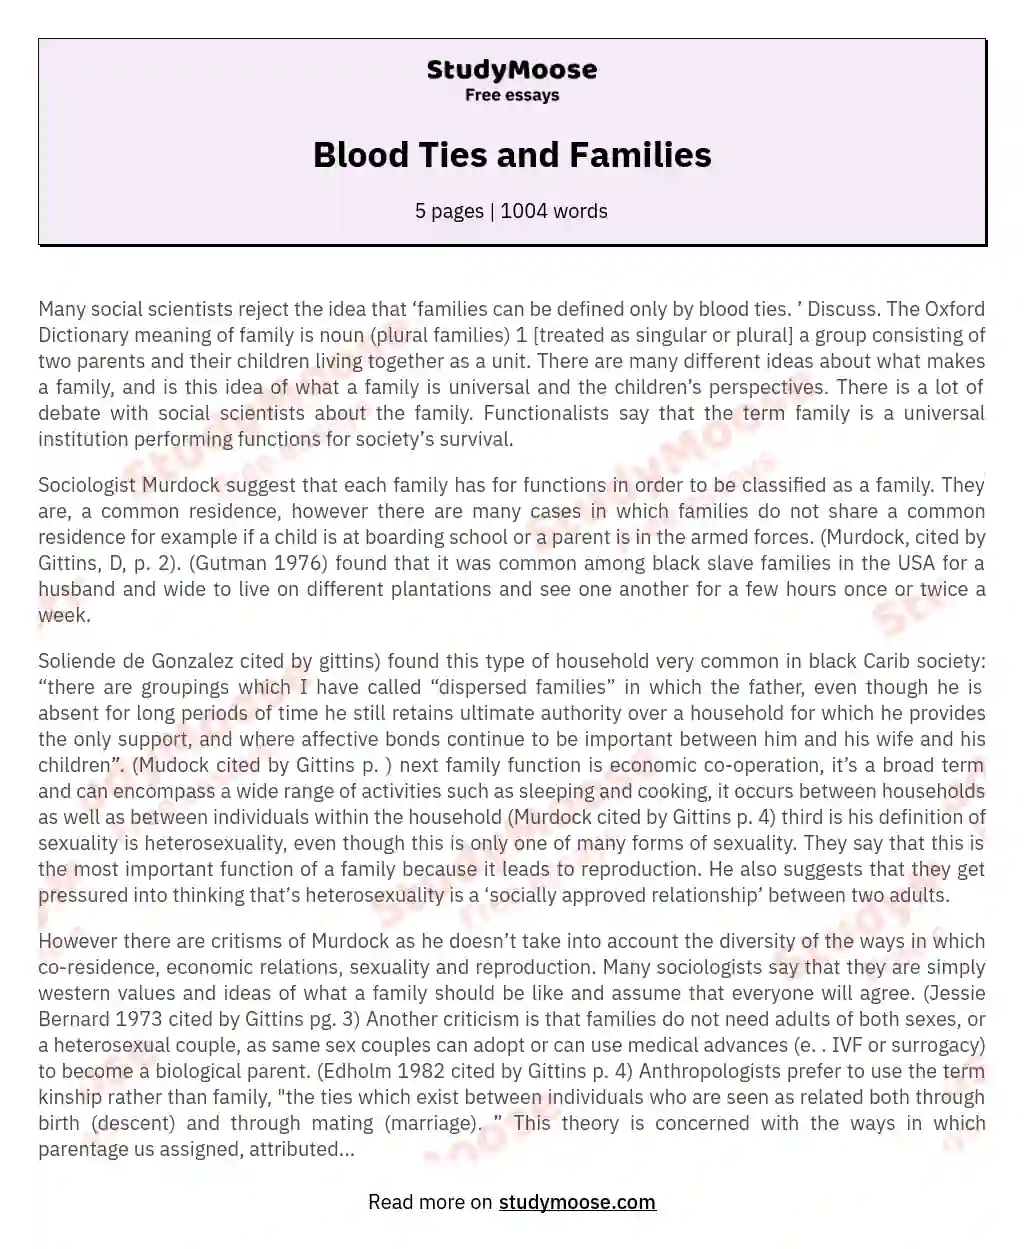 Blood Ties and Families essay